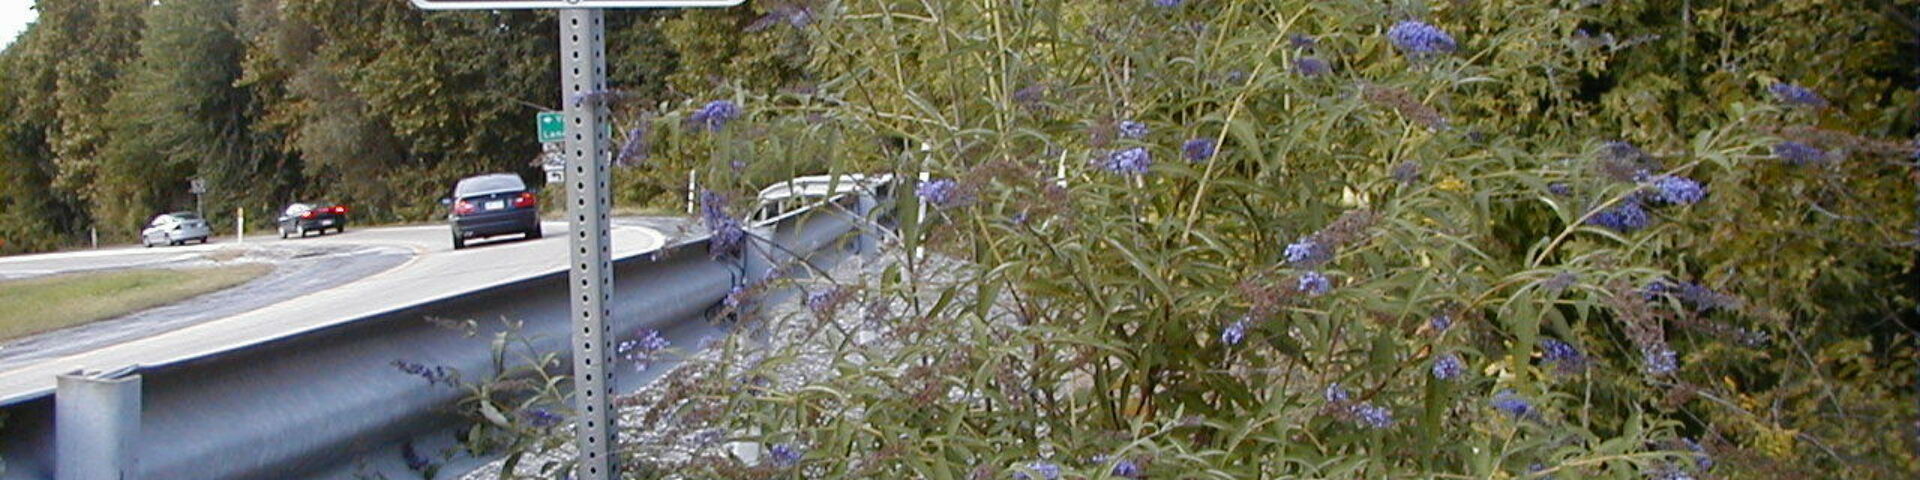 Butterfly bush, an invasive species, growing on the side of the road.